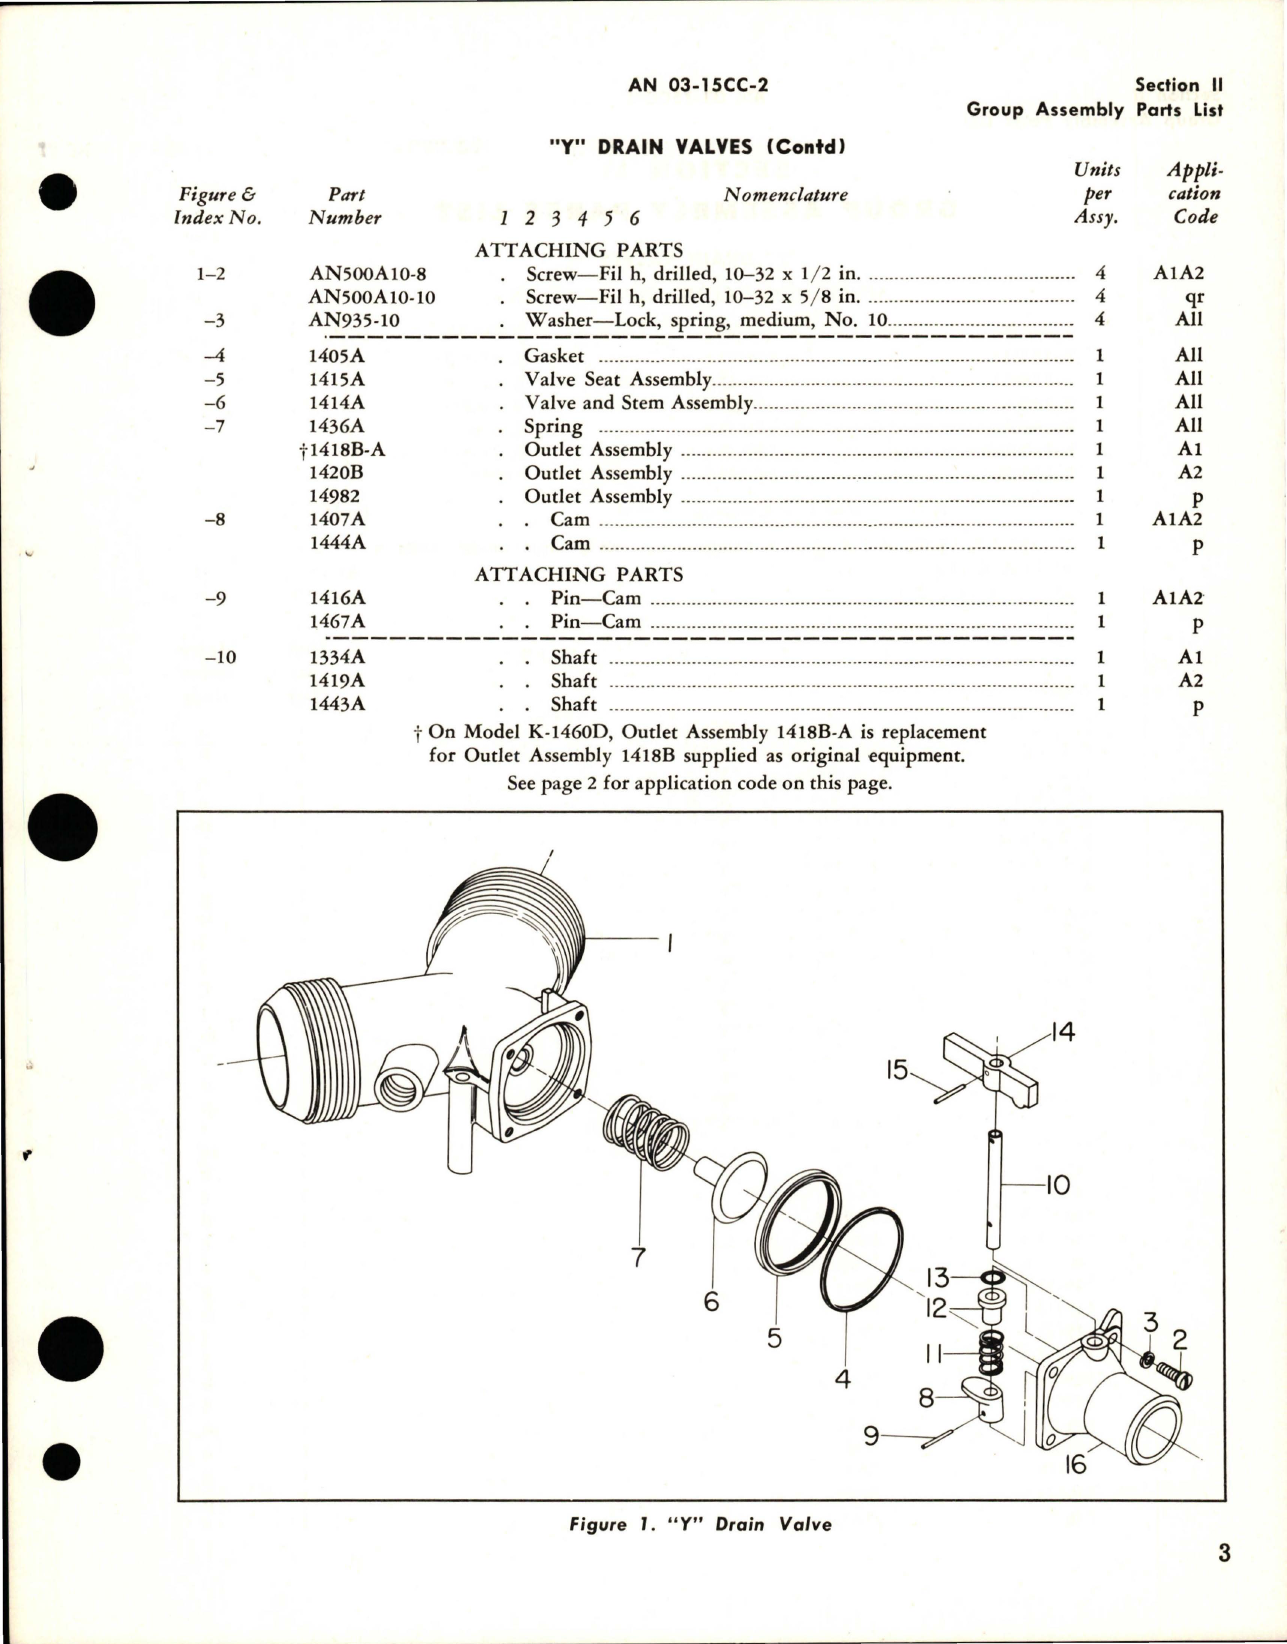 Sample page 5 from AirCorps Library document: Parts Catalog for Straight Drain and Defueling Valves - Y Drain